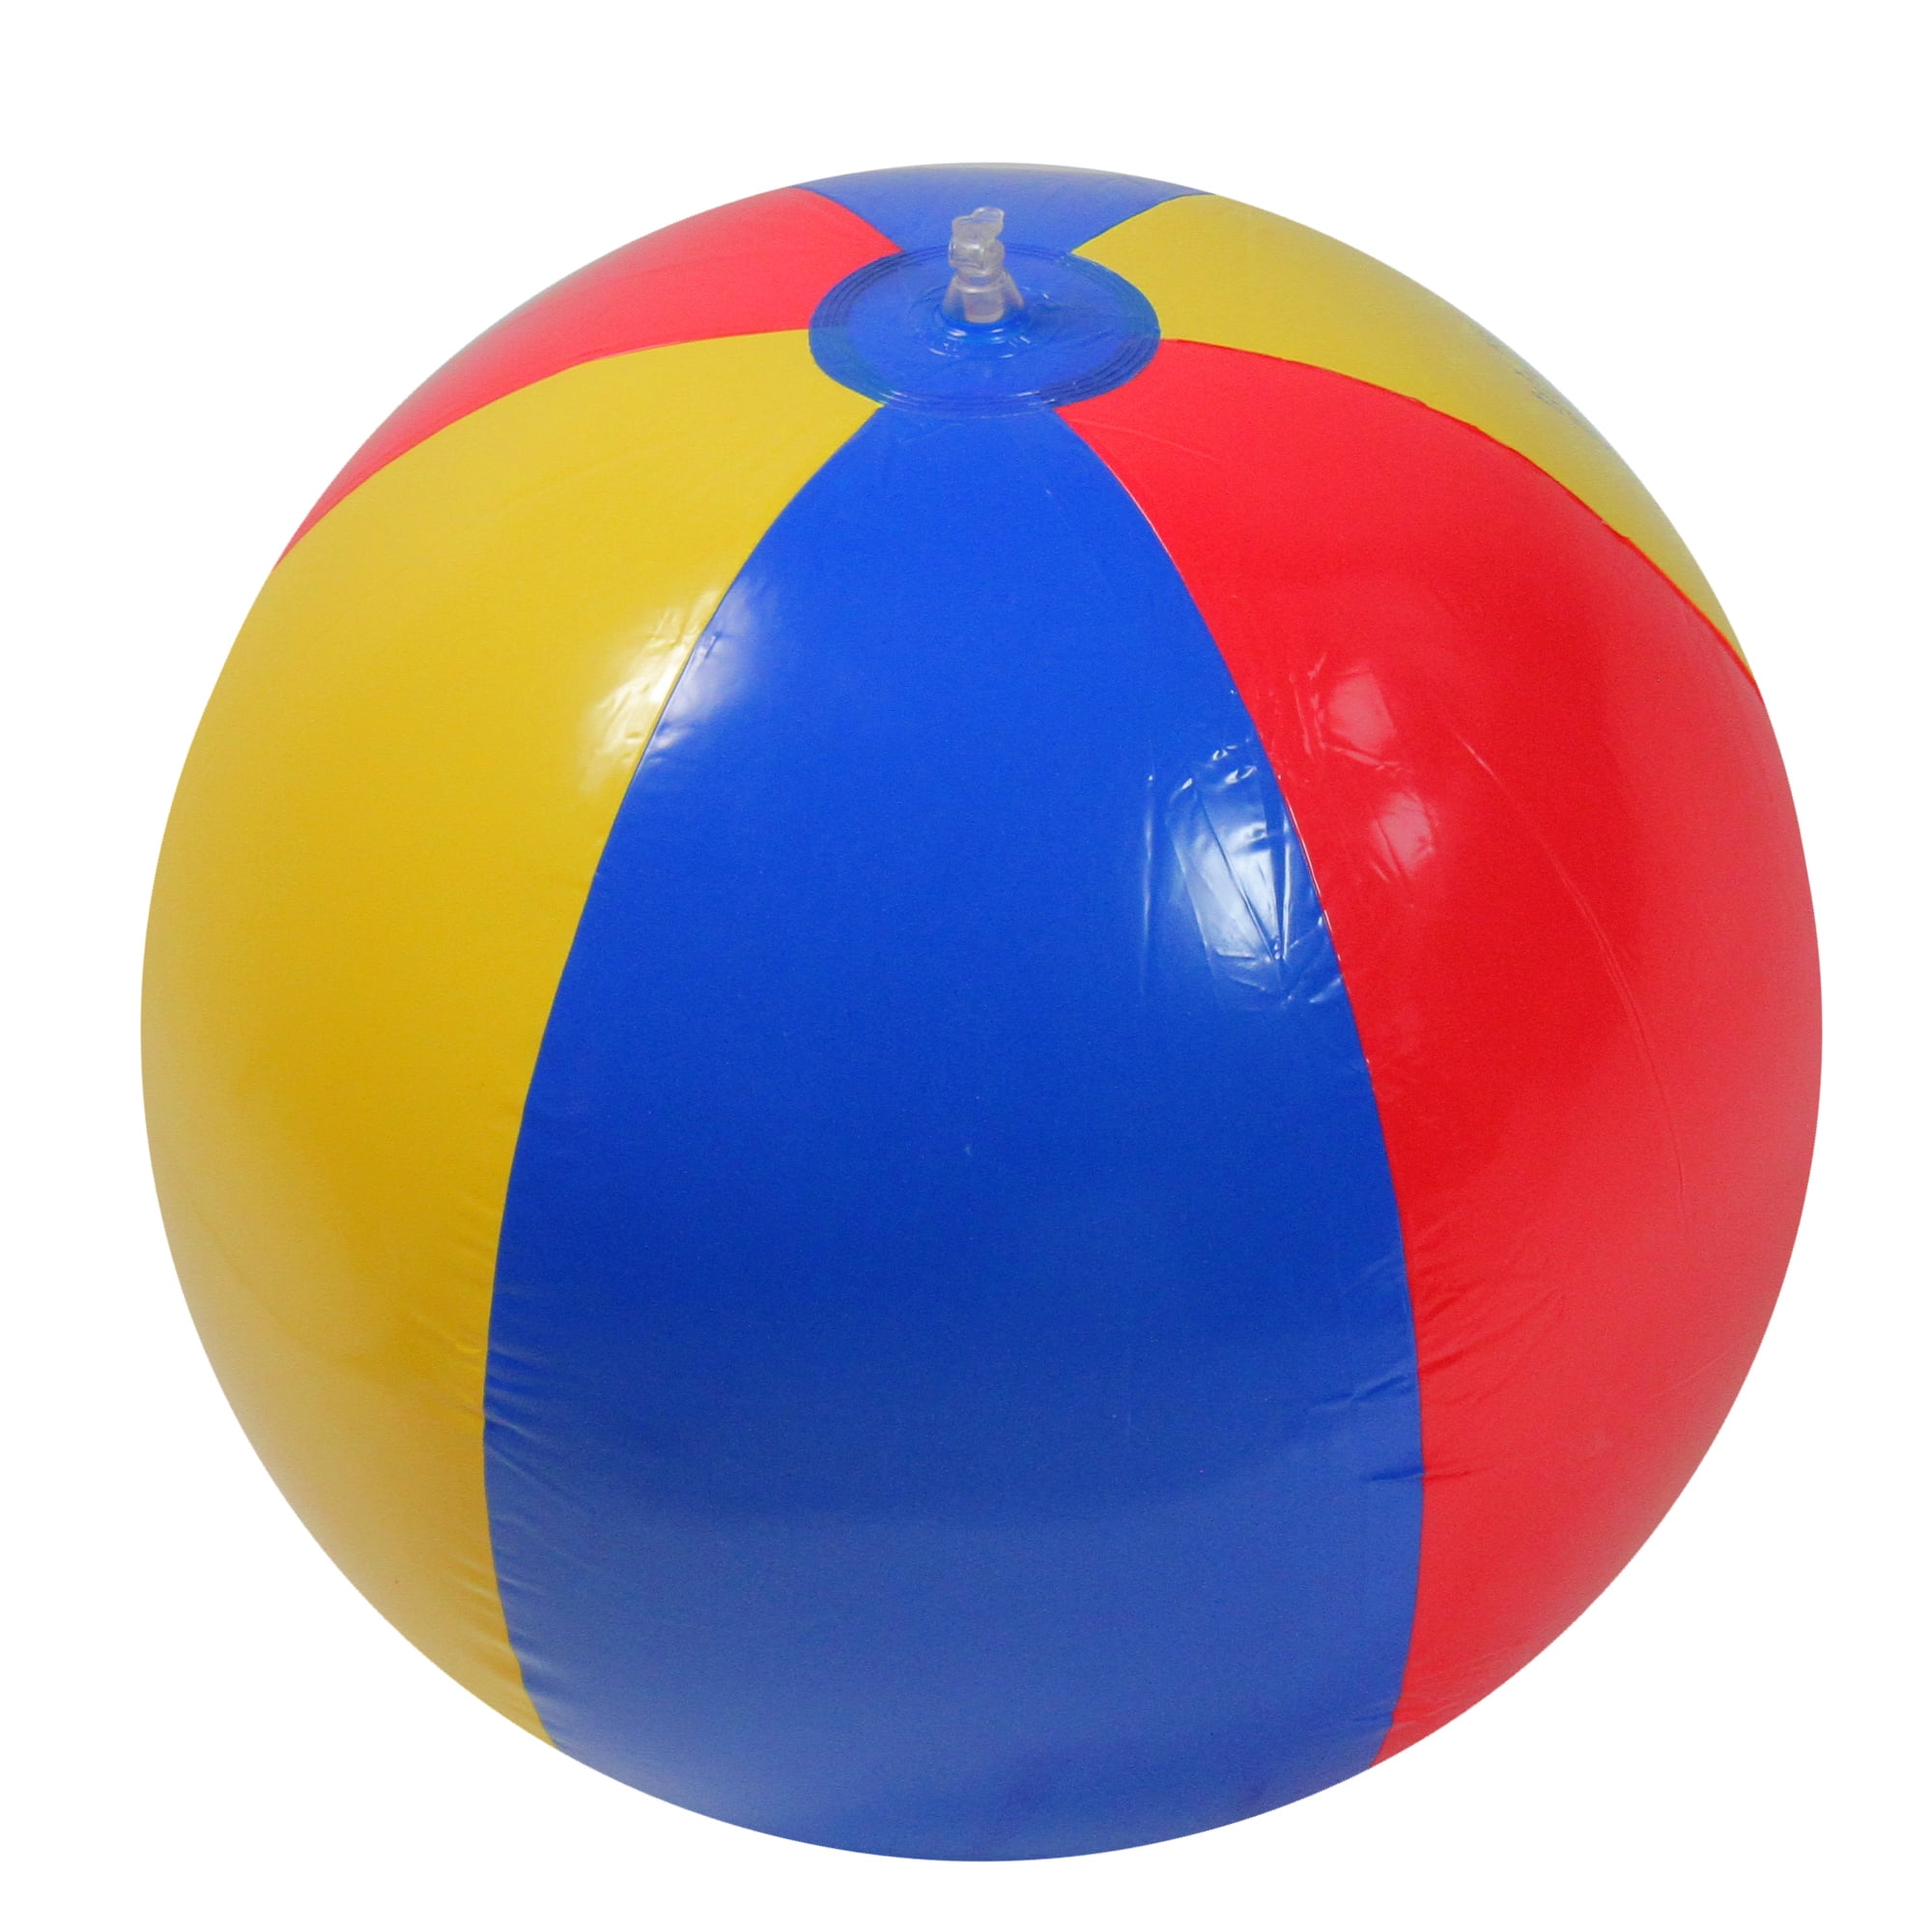 3 x BLUE INFLATABLE TRANSLUCENT BEACH BALL SWIMMING POOL KIDS TOY SWIM BLOW UP 